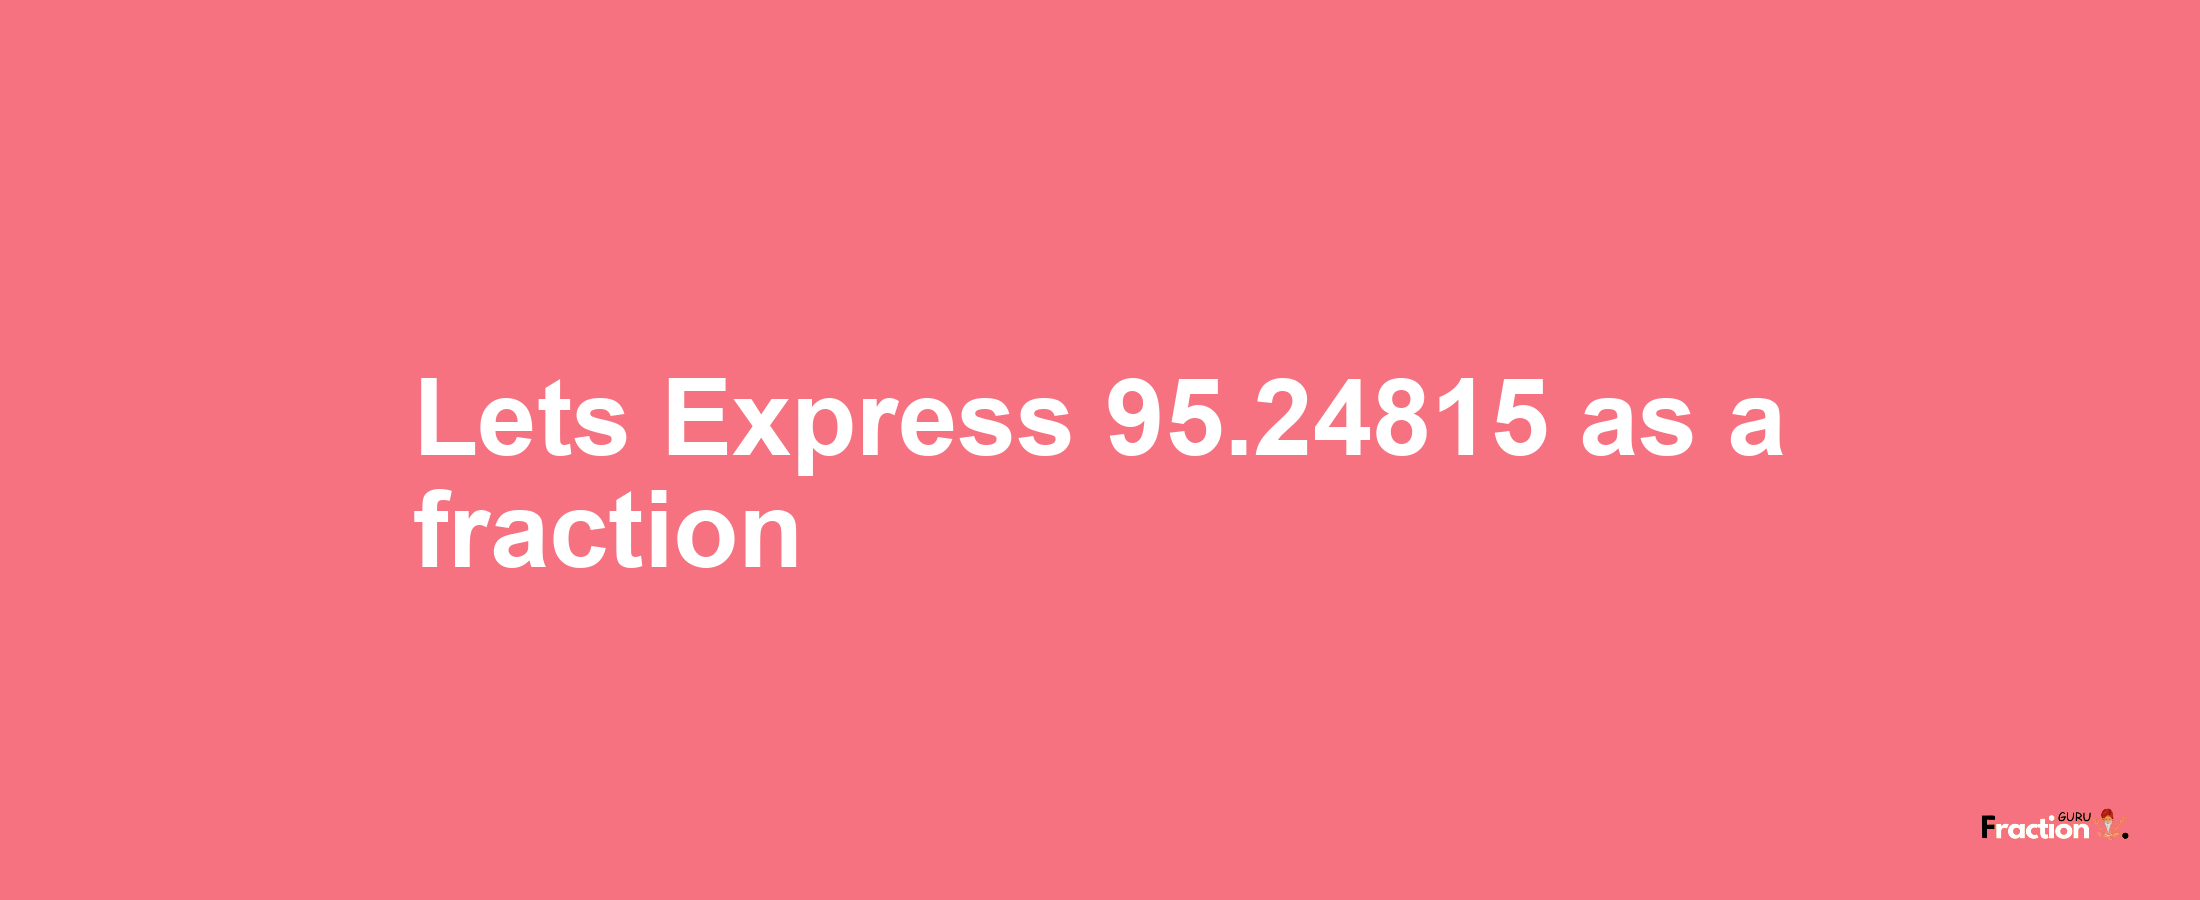 Lets Express 95.24815 as afraction